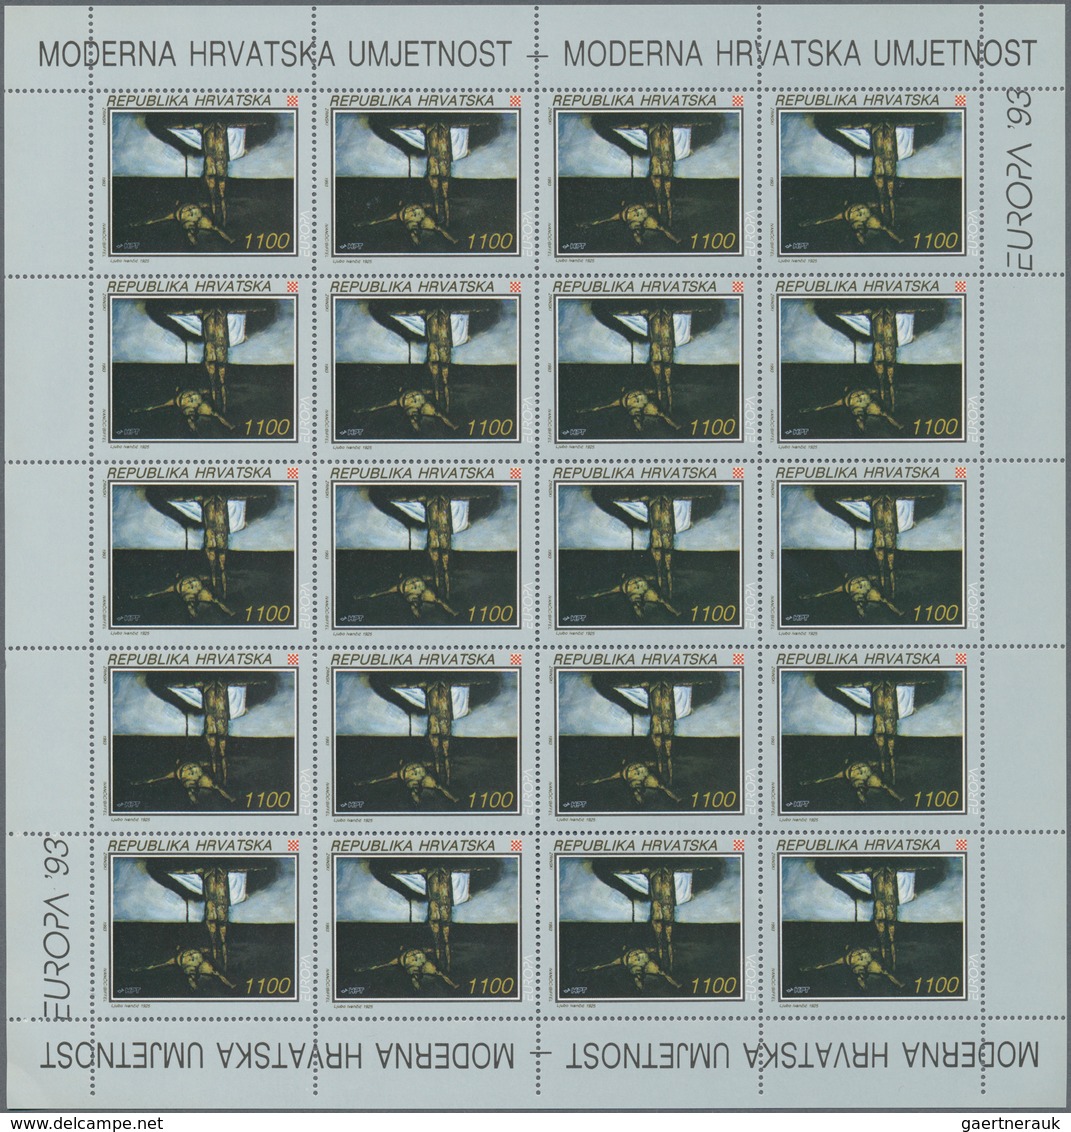 Kroatien: 1993, Europa, 1040 Sets In 65 Sheets Of 16 Stamps Each Issue, Mint Never Hinged. Michel 62 - Croatia